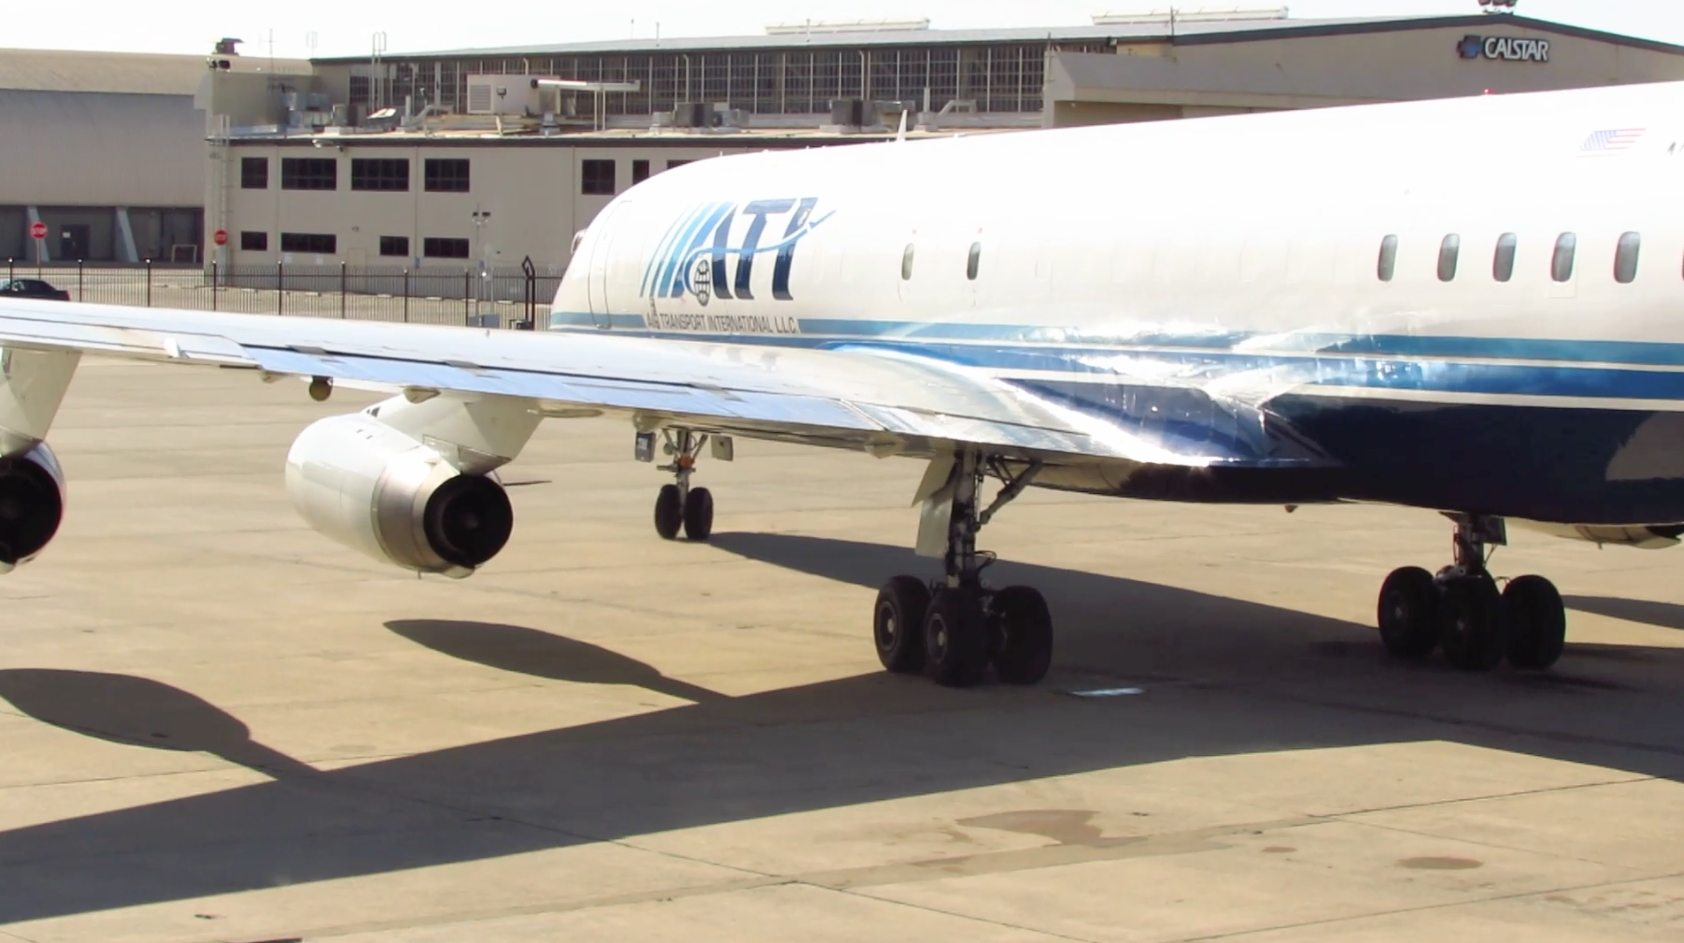 ATI DC-8-62 N799AL taxis off stand for its final flight within the Continental United States at McClellan Airport on May 12, 2013, bound for Travis AFB. This is a screenshot from the 9 episode mini series "DC-8 Farewell" that streams on the JetFlix TV streaming service for aviation super fans.